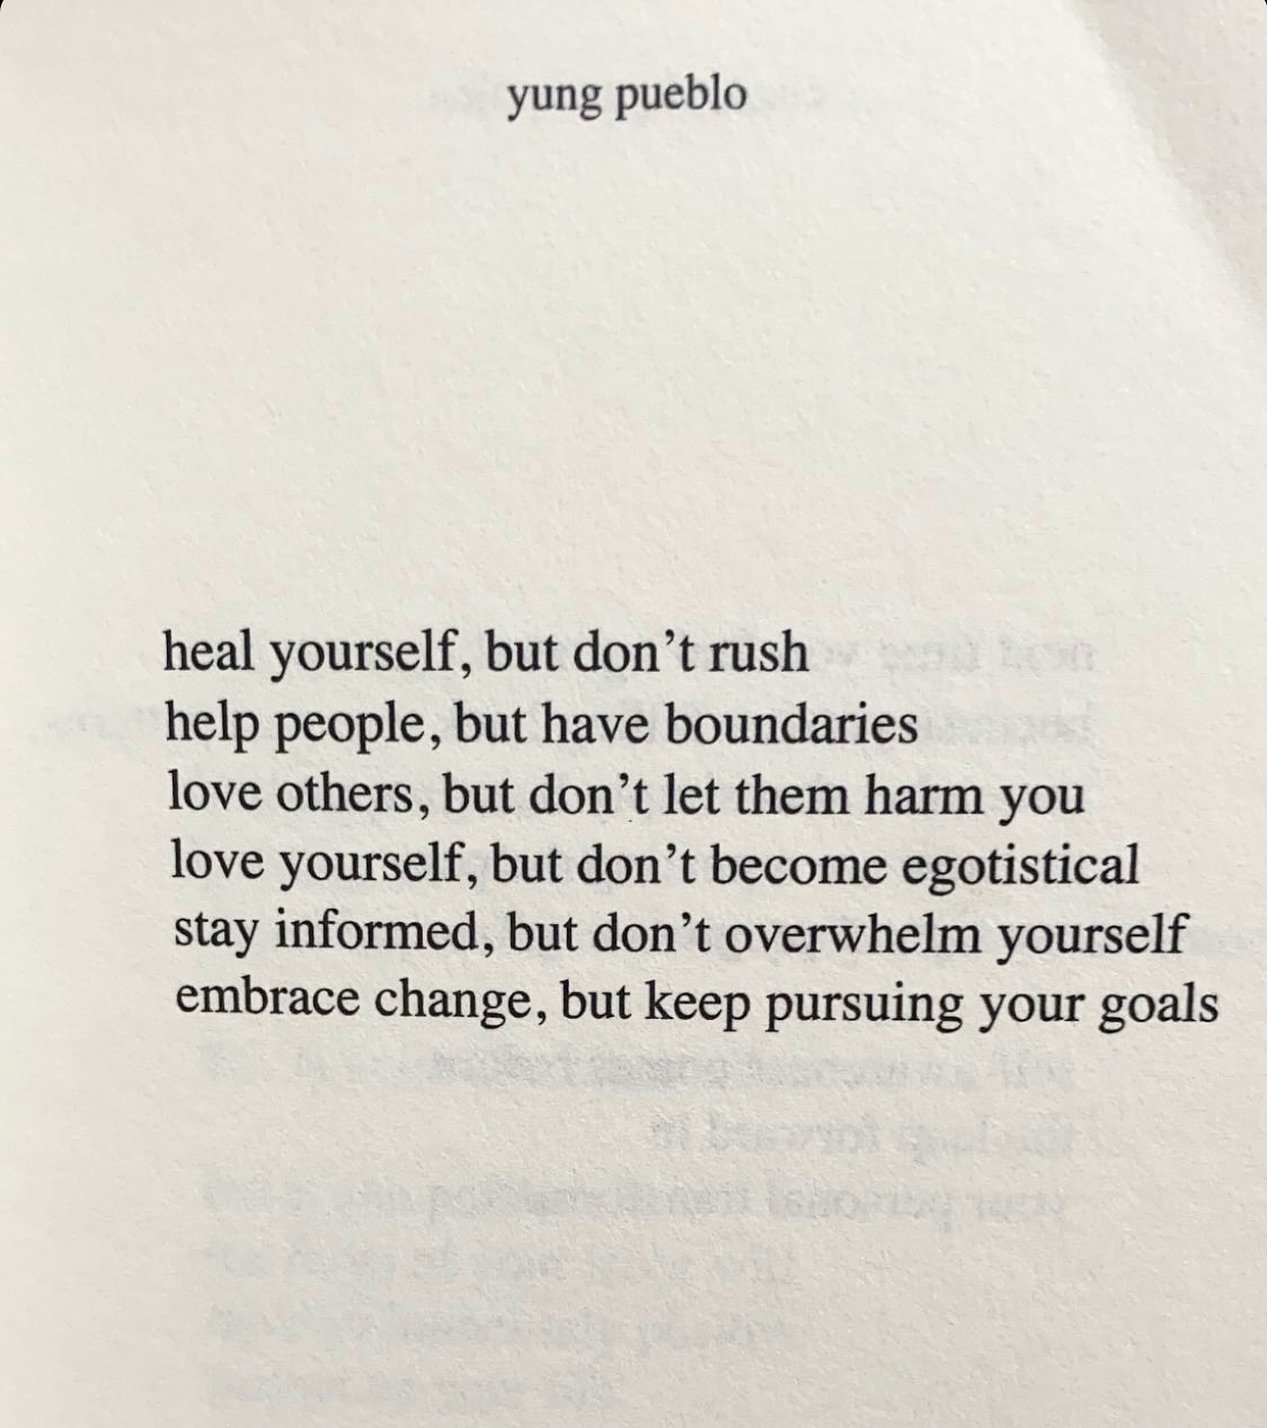 Words of wisdom from one of our favourite poets @yung_pueblo #ClarityAndConnection 🪐💫✨⚡️#mondaymotivation
⁠
⠀⁠
⠀⁠
⠀⁠
⠀⁠
⁠
#levelupwithsocialcollective #dontquityourdaydream #thisgirlmeansbusiness #hersuccess #herbusiness #solopreneur #entreprenher 